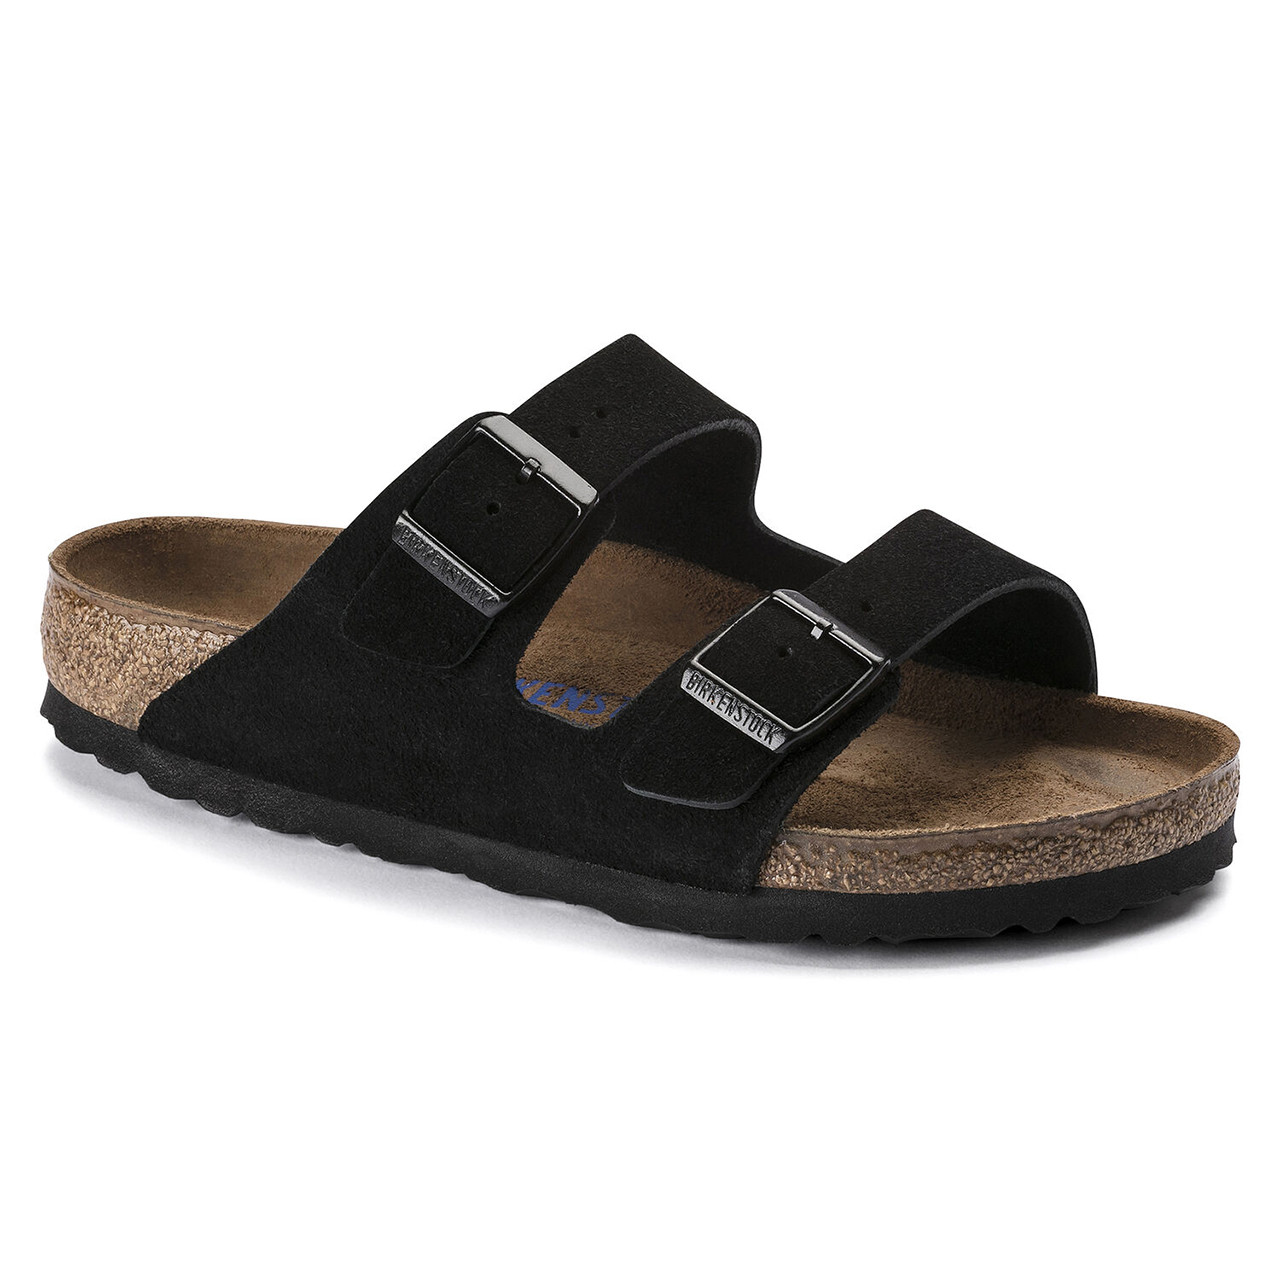 Birkenstock Arizona Shearling Black Suede - Awesome Shoes